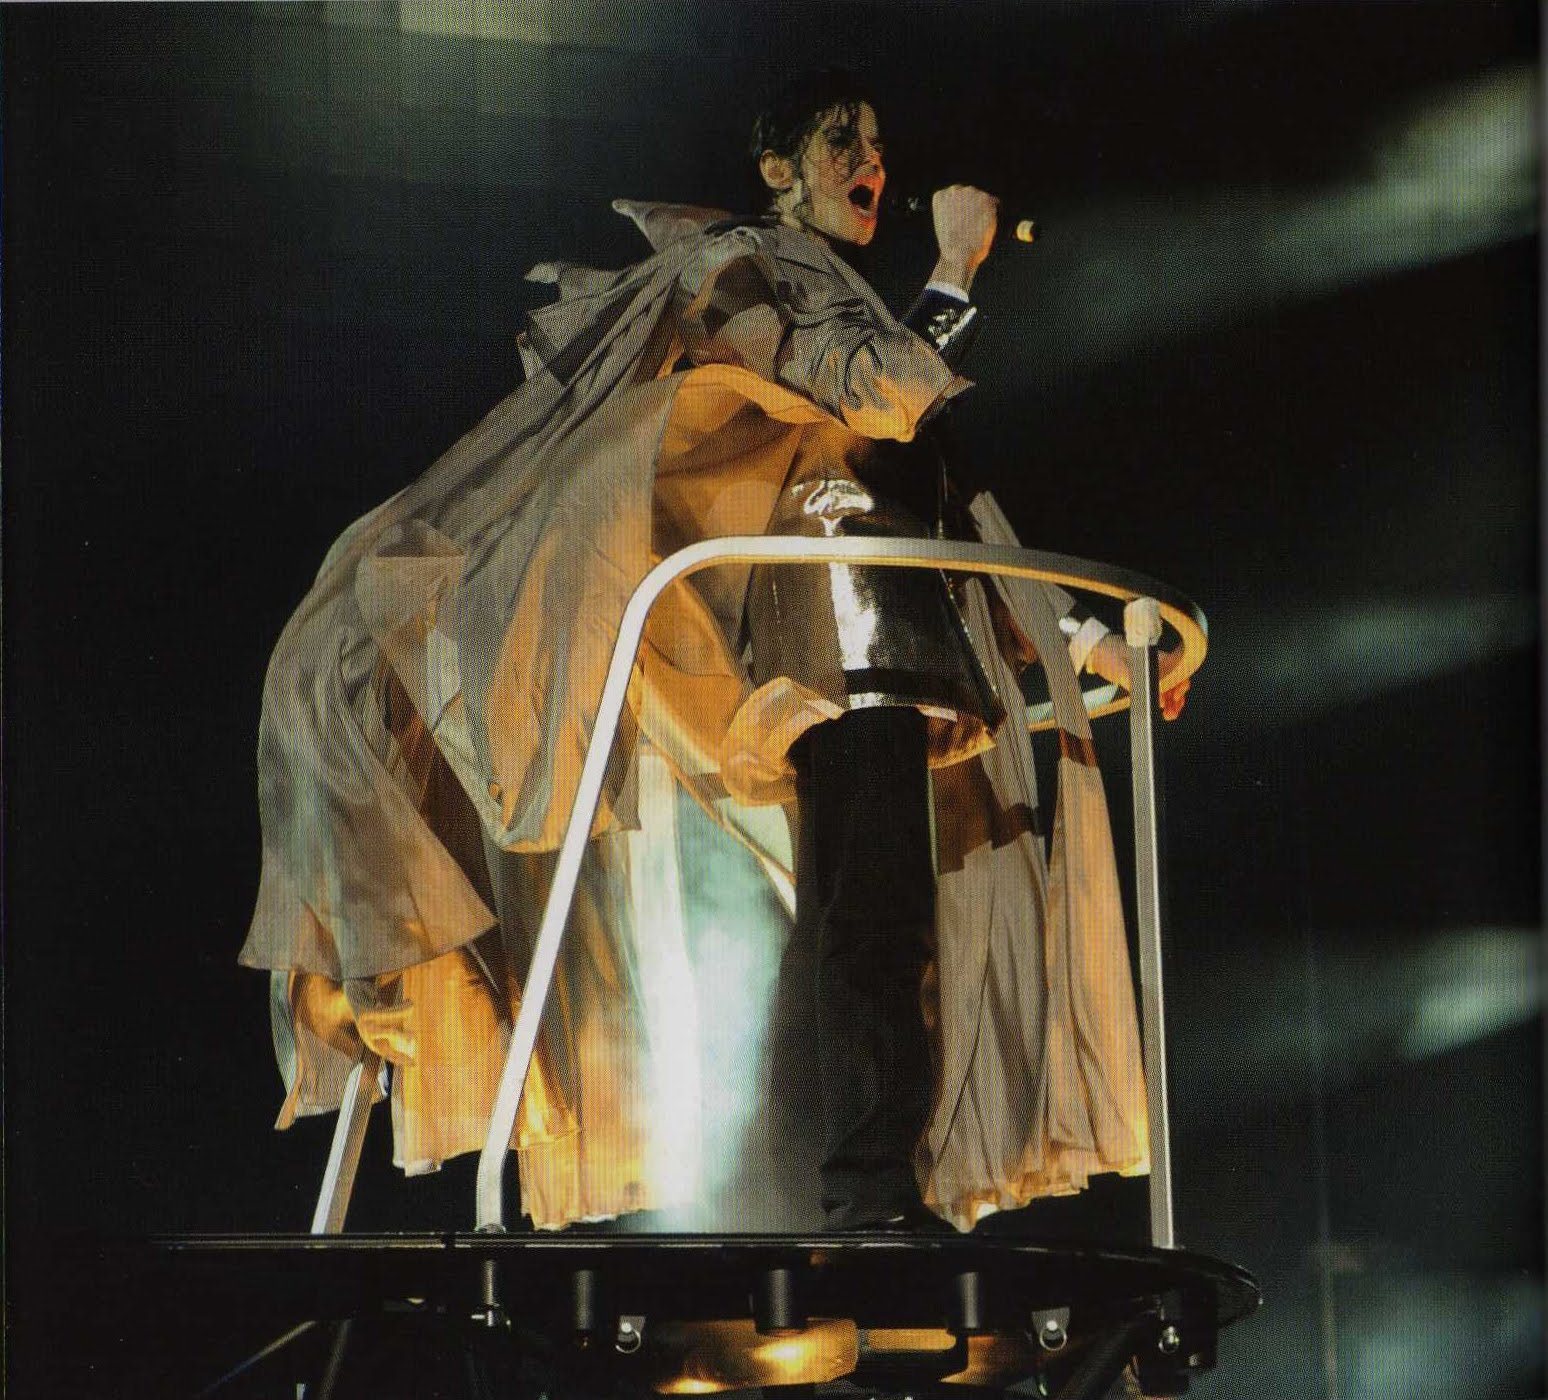 Michael In This Is It---In The Cherry Picker.